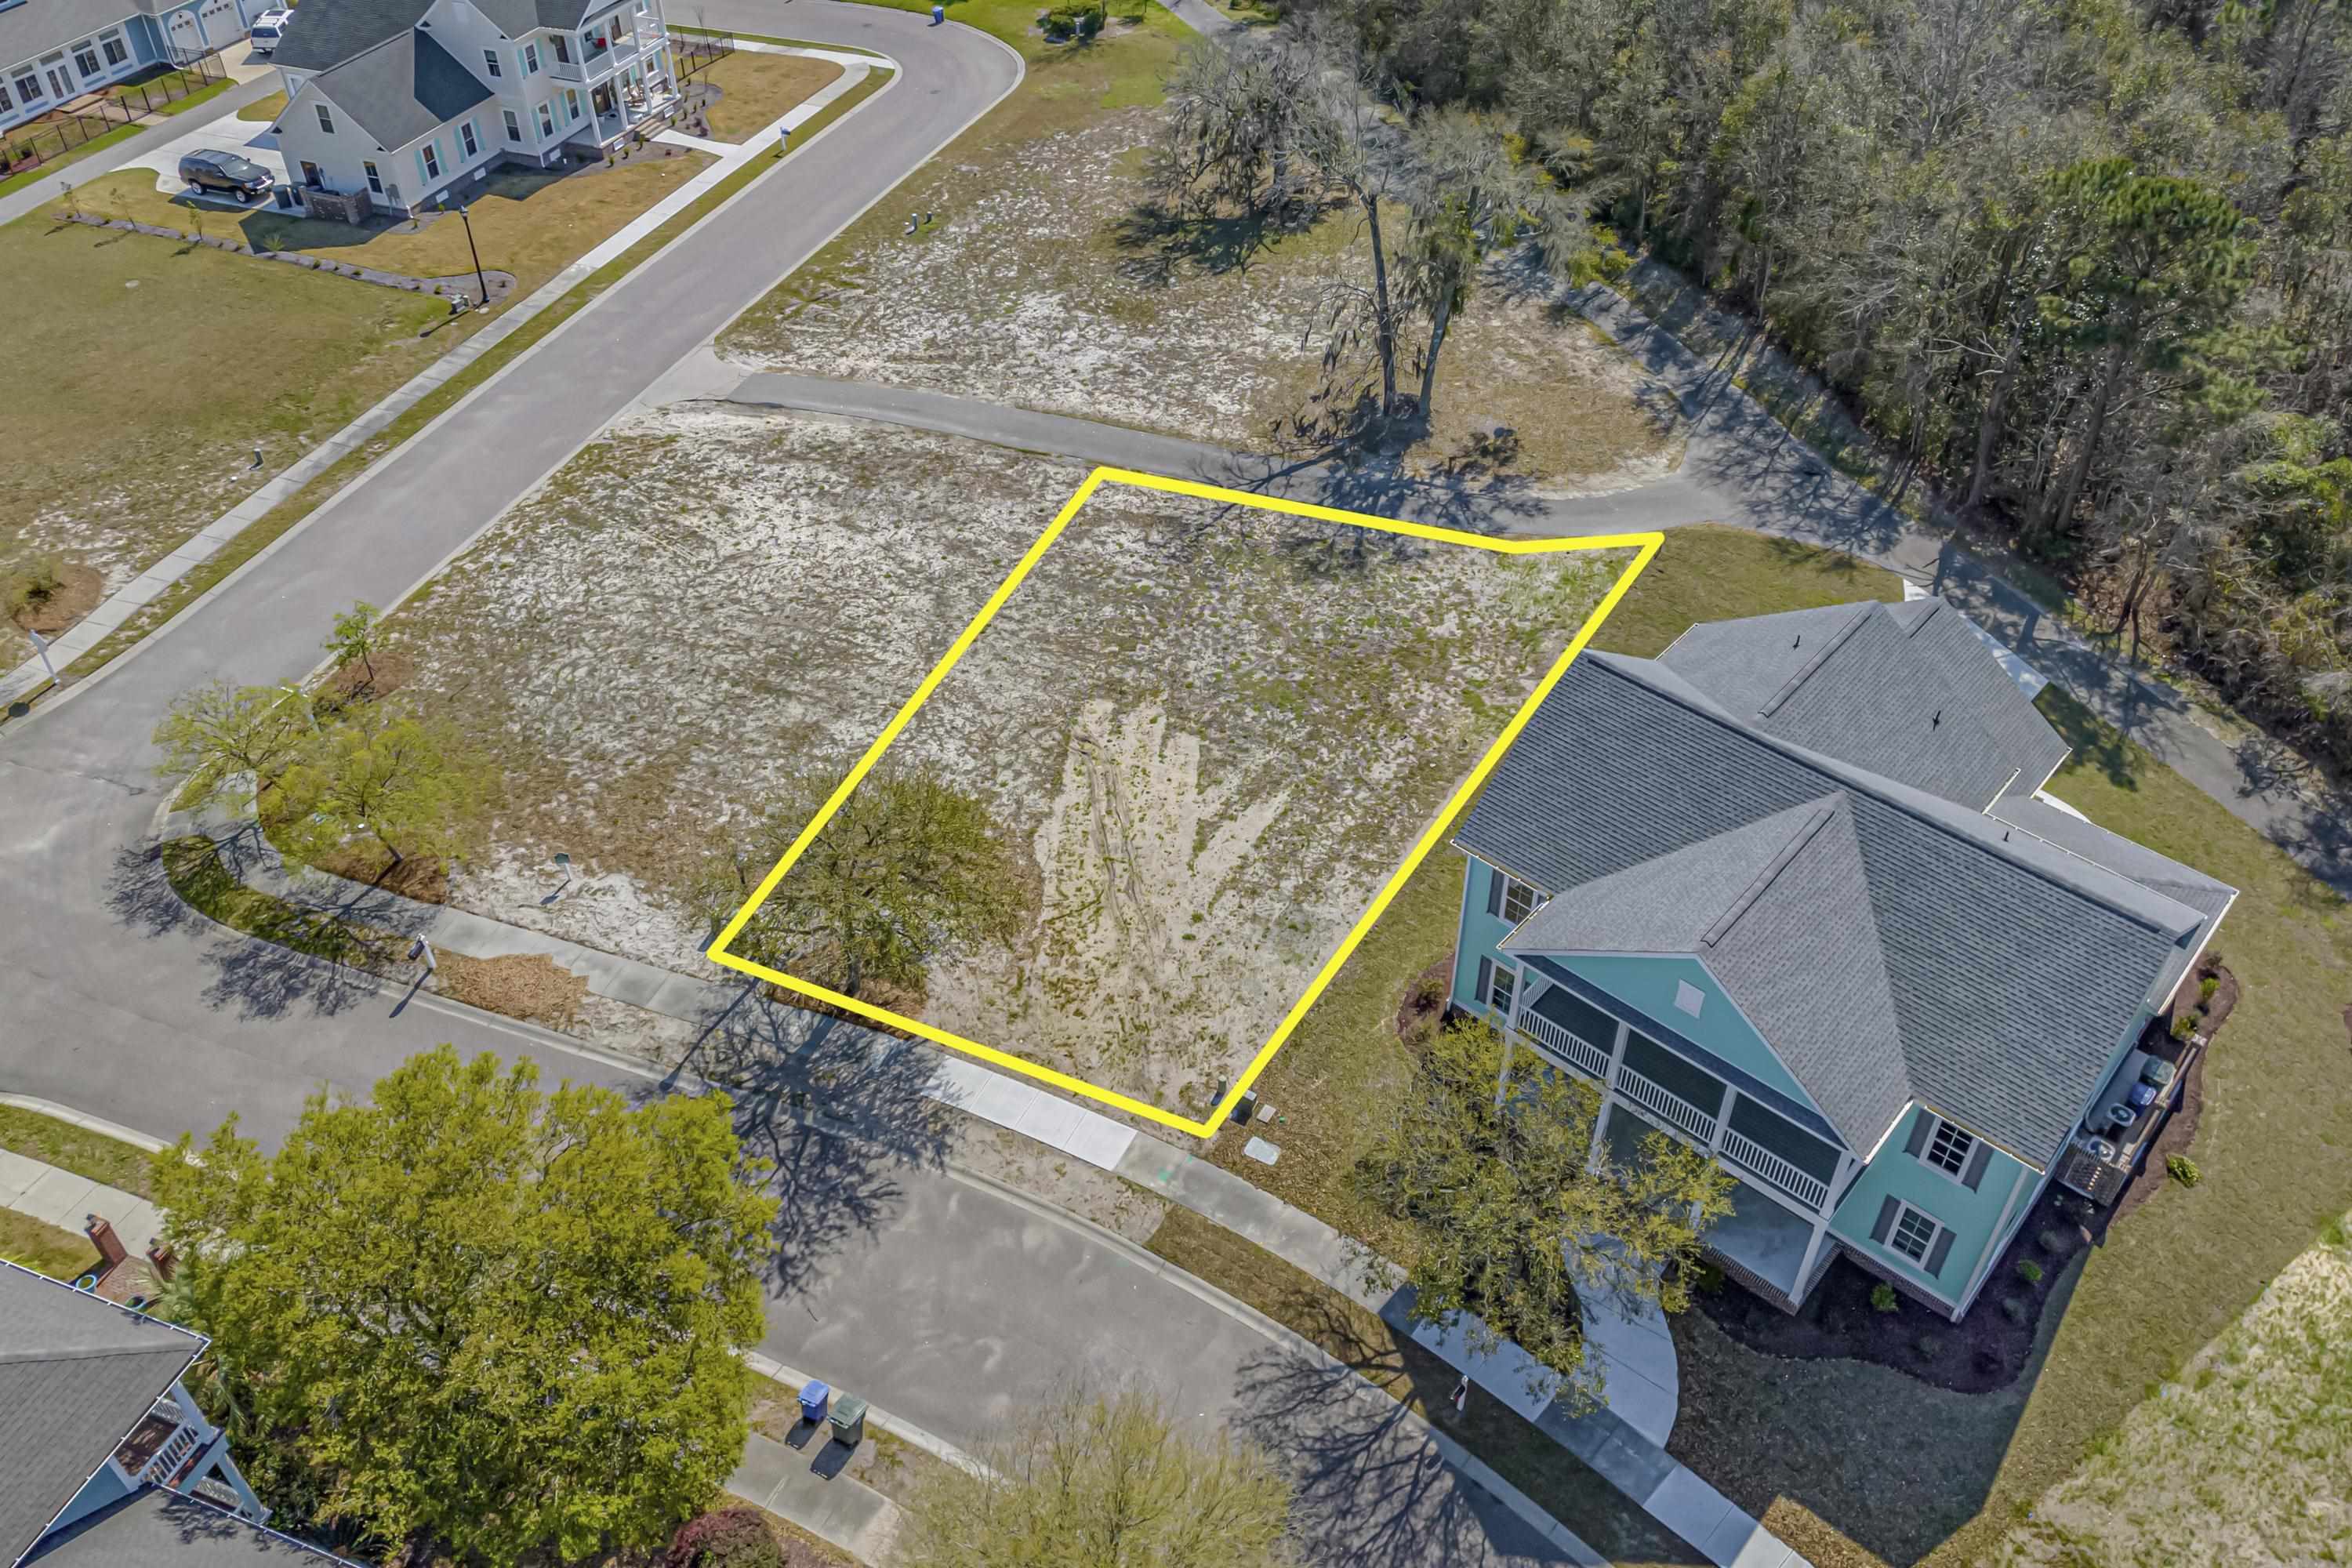 act now to take advantage of one of the best values in charleston landing!  this homesite provides many building opportunities - whether you are looking to build a single level or multi level home, this one is bound to suit your needs. a beautiful street scene at the front and tranquil setting across the alley at the back will frame great views from every room of your new home. the lot is cleared and ready for construction.  don't miss this opportunity to purchase an outstanding homesite in one of the most prestigious neighborhoods in north myrtle beach.  charleston landing amenities include a marsh front pool and clubhouse, basketball courts, a playground and wide, sidewalk-lined streets. this quiet, peaceful community is conveniently located to beaches, schools, shopping, area night life and of course the the robert edge connector and hwy 31.